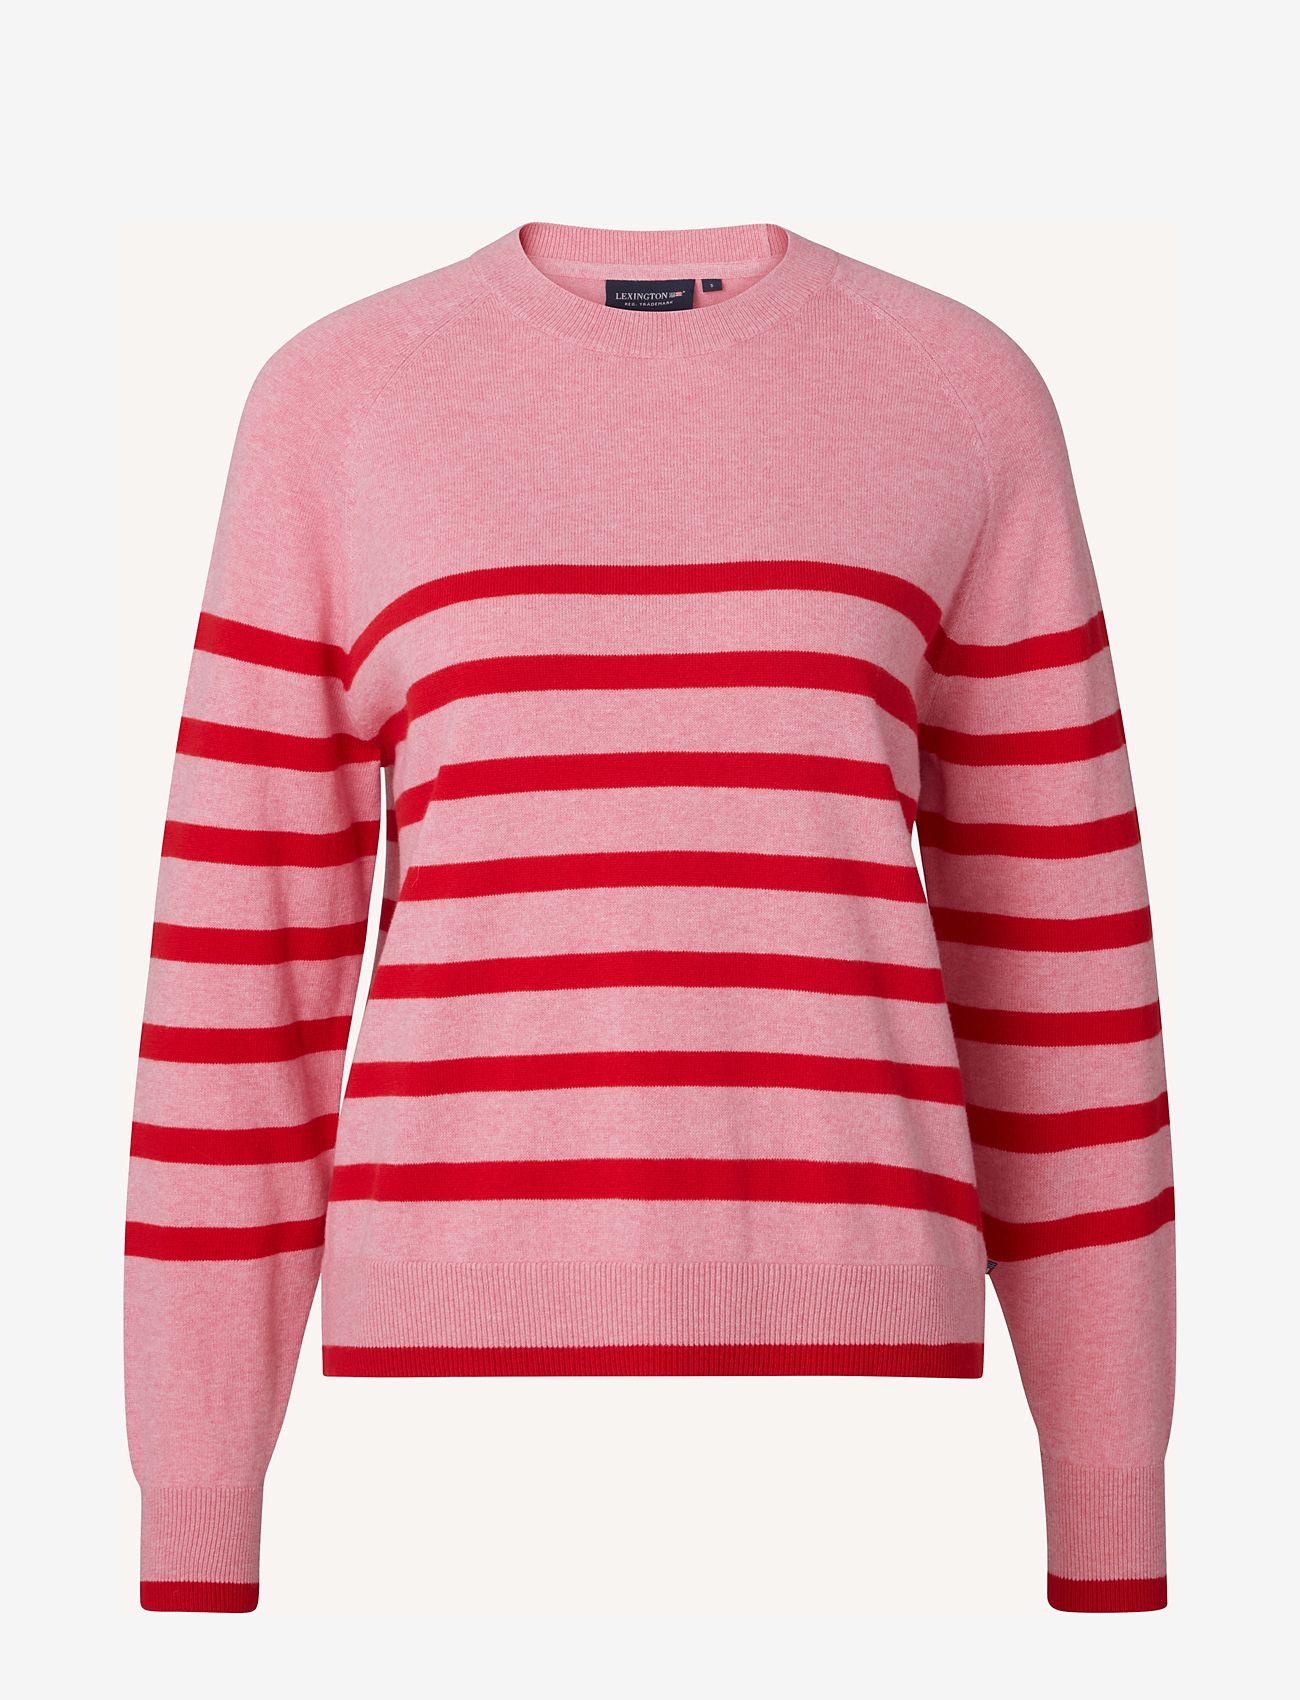 Lexington Clothing - Freya Cotton/Cashmere Sweater - pullover - pink/red stripe - 0